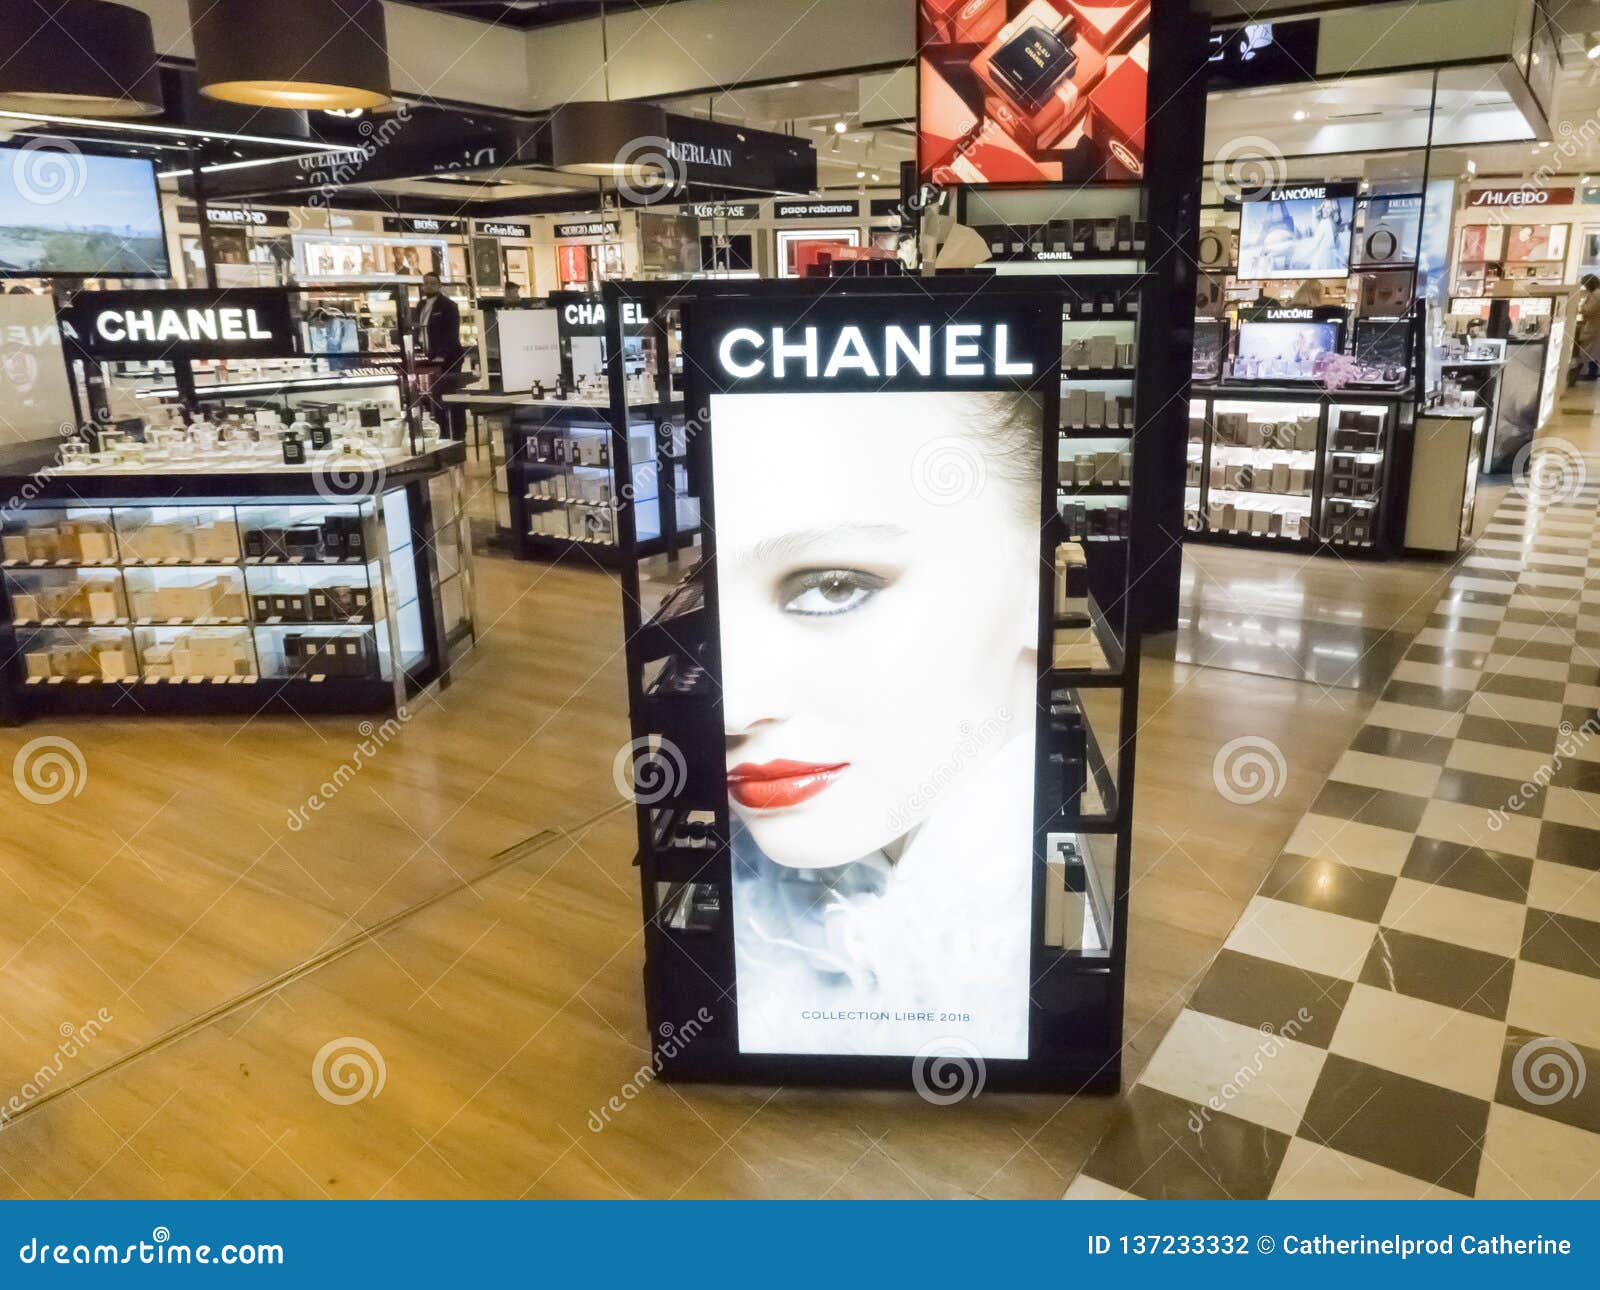 Chanel launches No 5 Spaceship activation at Heathrow - Global Cosmetics  News